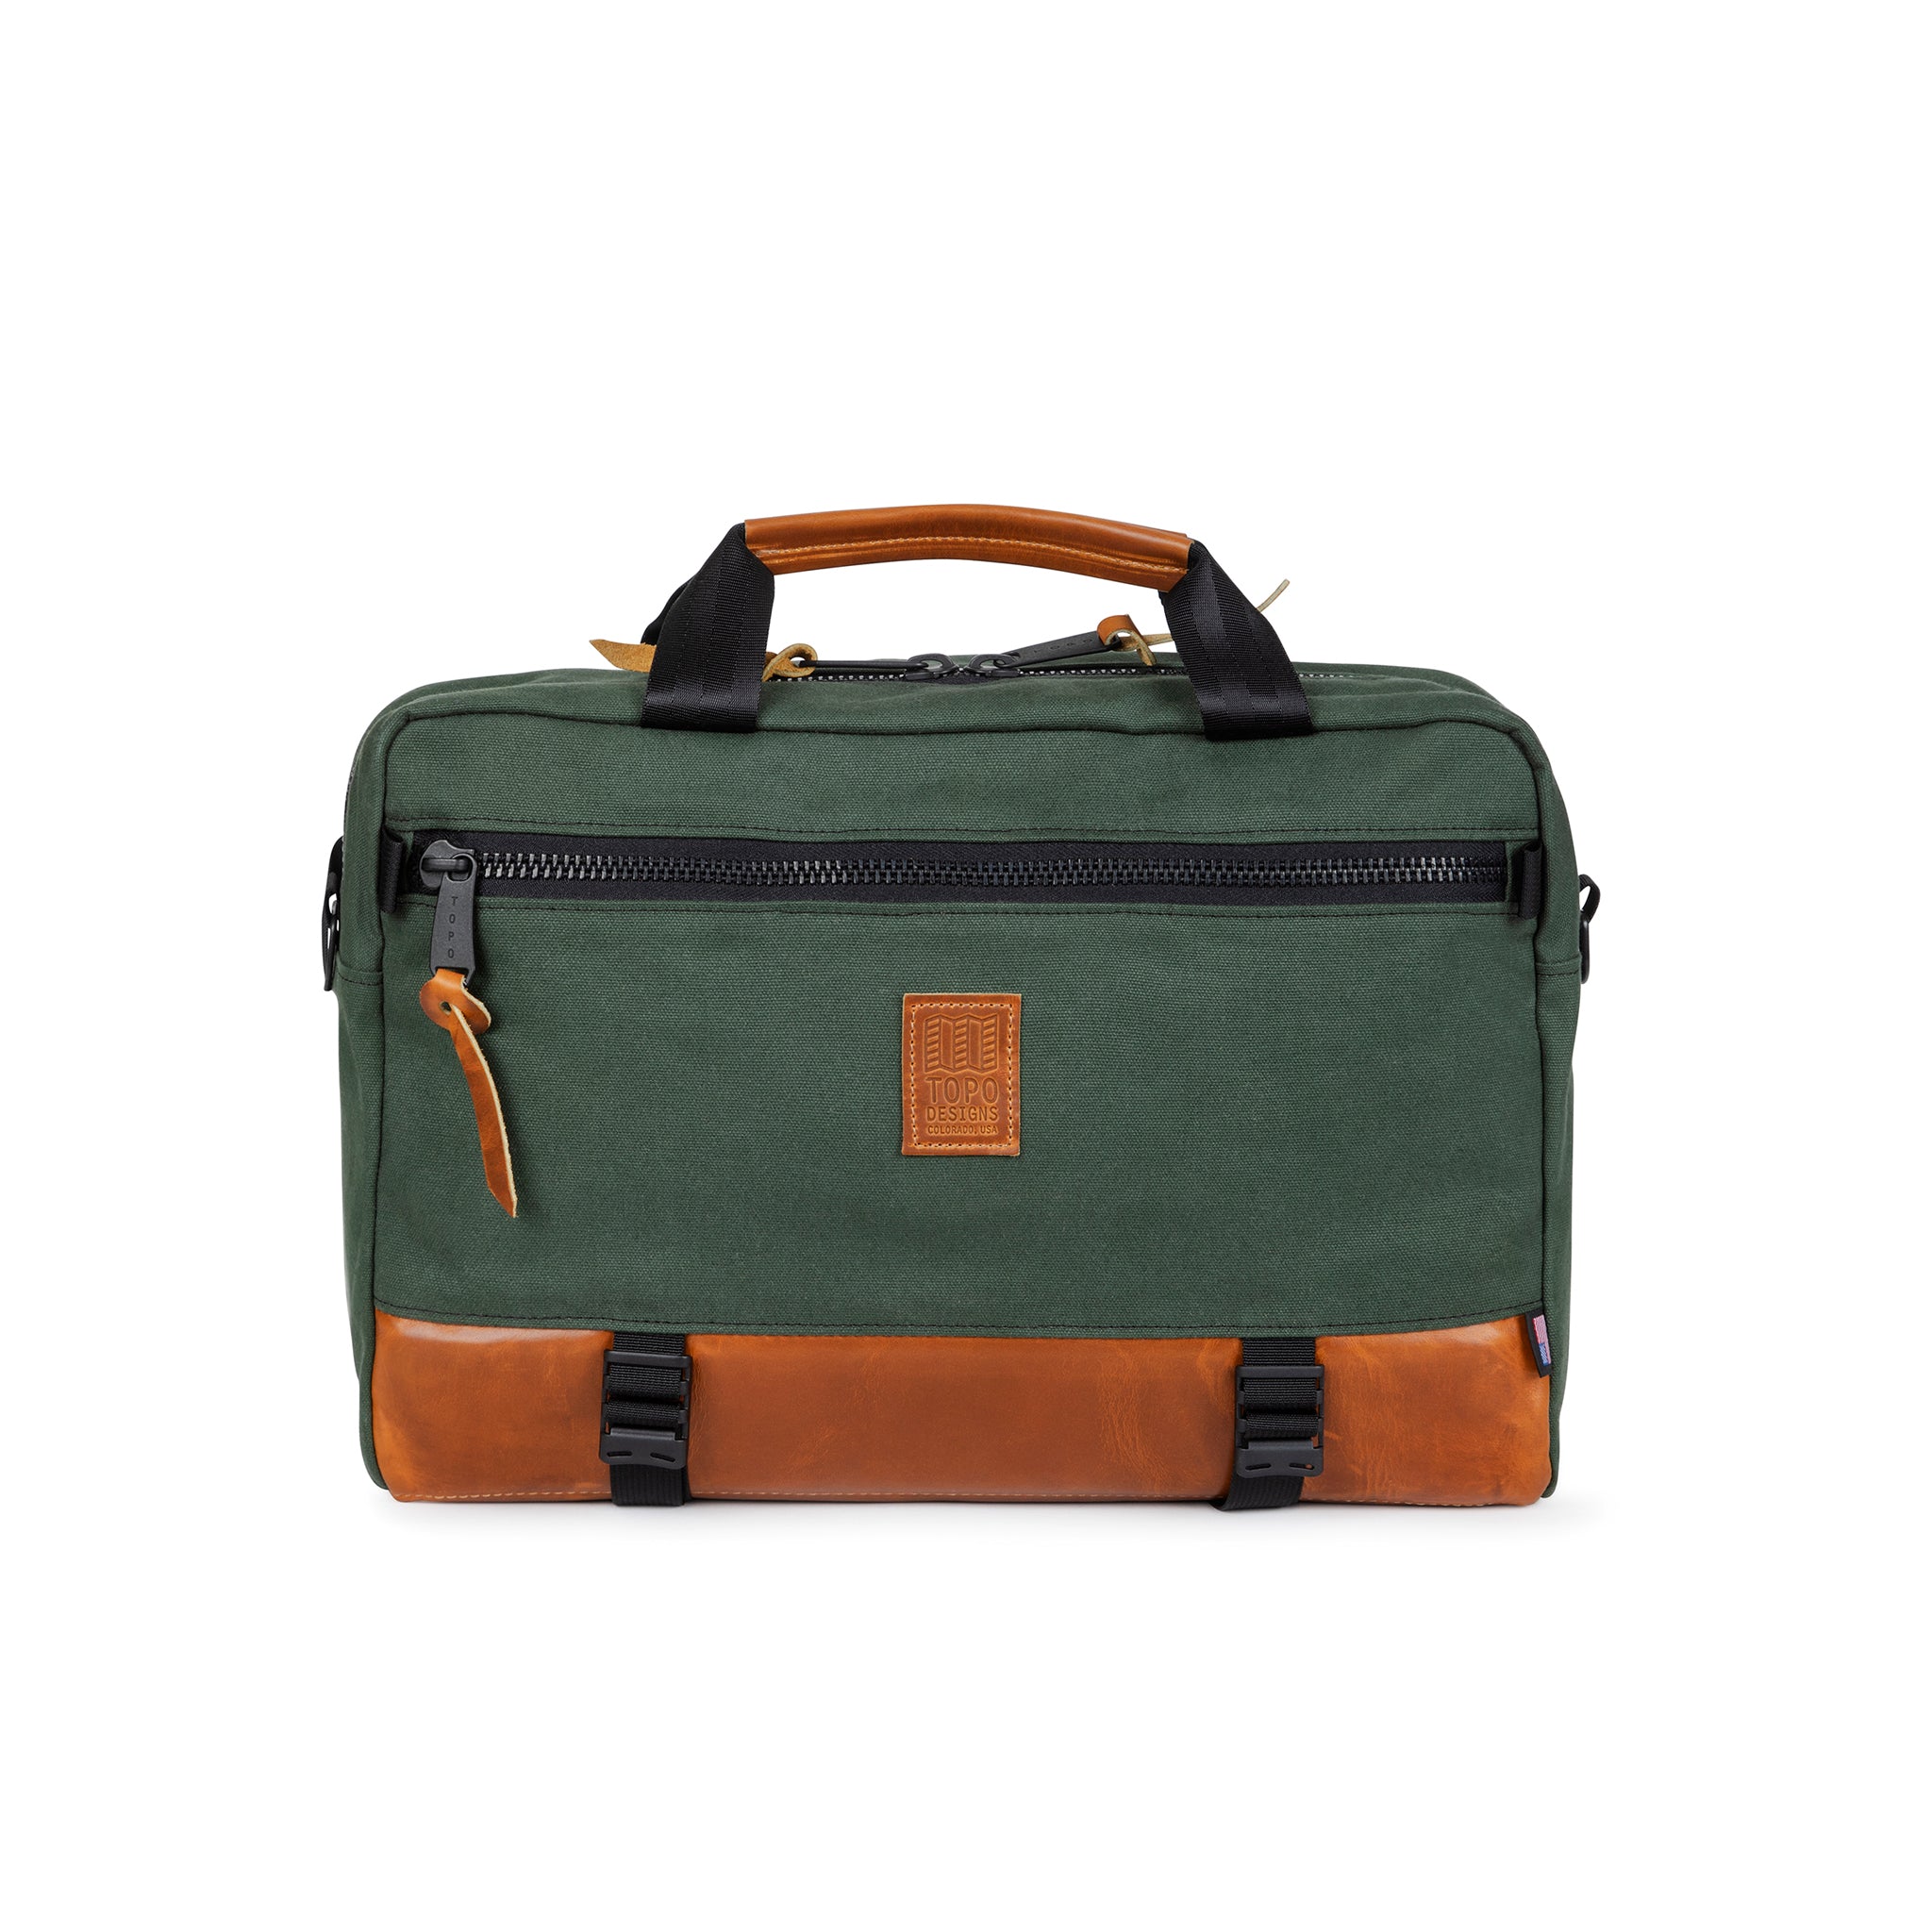 Personalize your Cenzo Commuter Brief